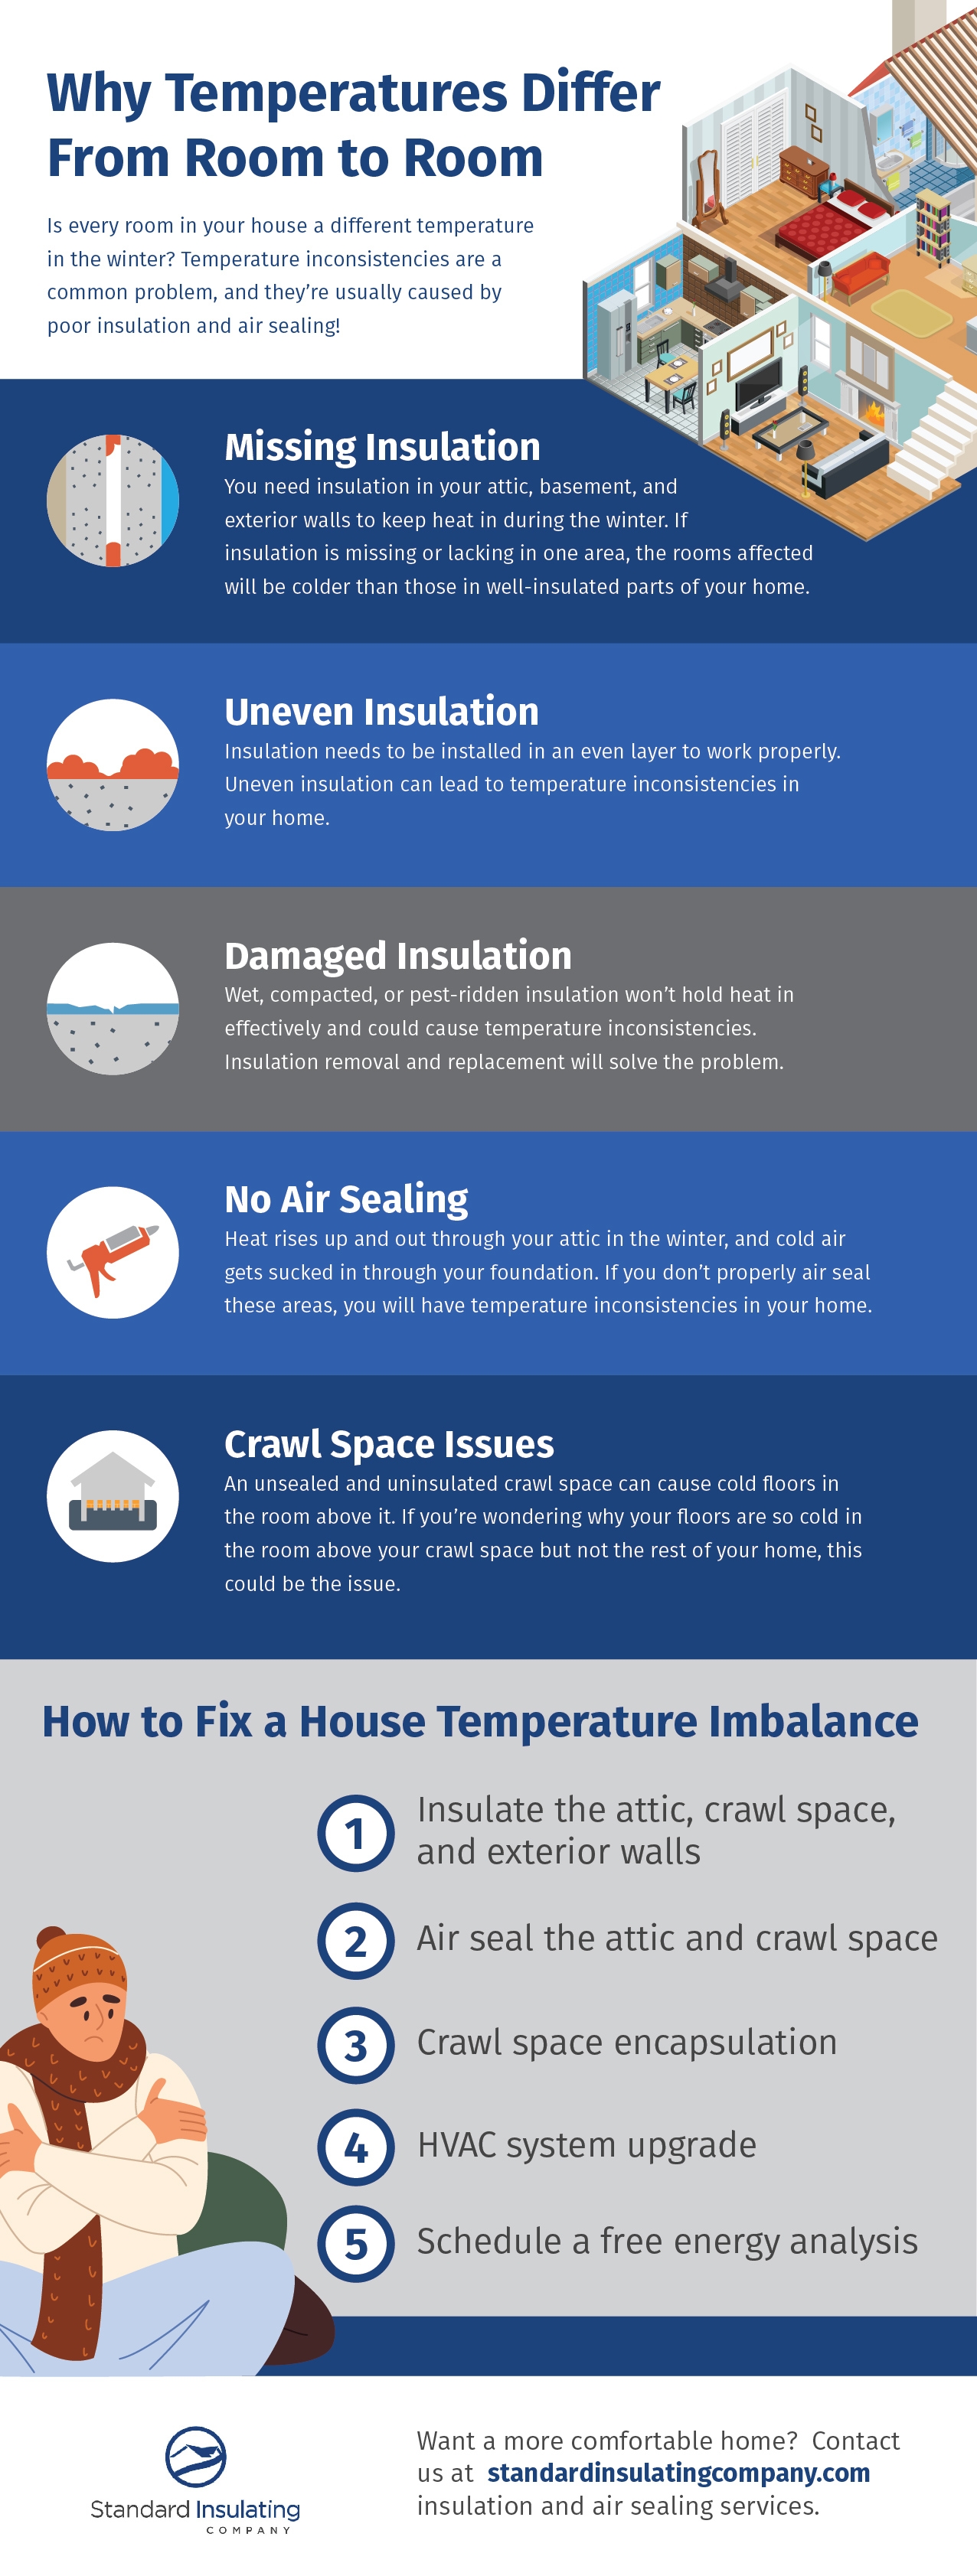 Why Temperatures Differ From Room to Room infographic